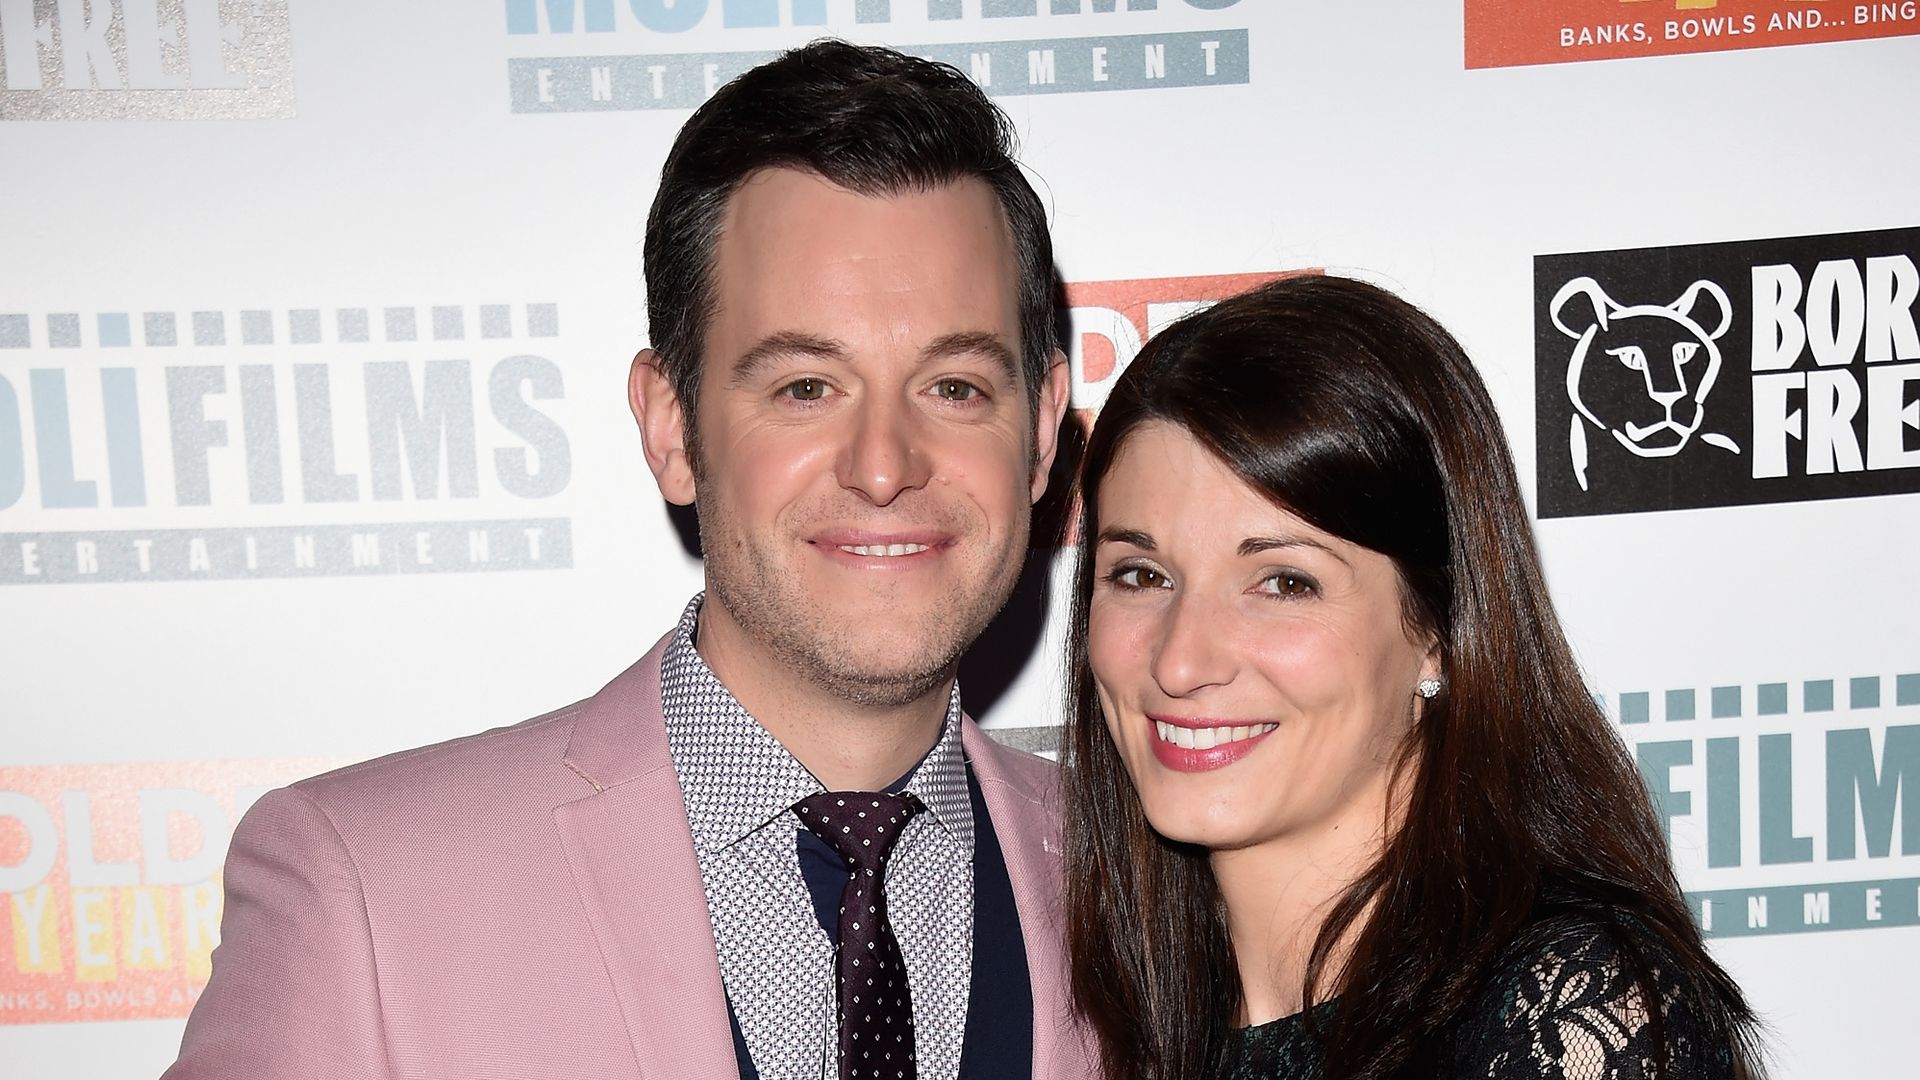 Matt Baker's wife Nicola's decadent birthday cake for daughter Molly leaves fans with questions